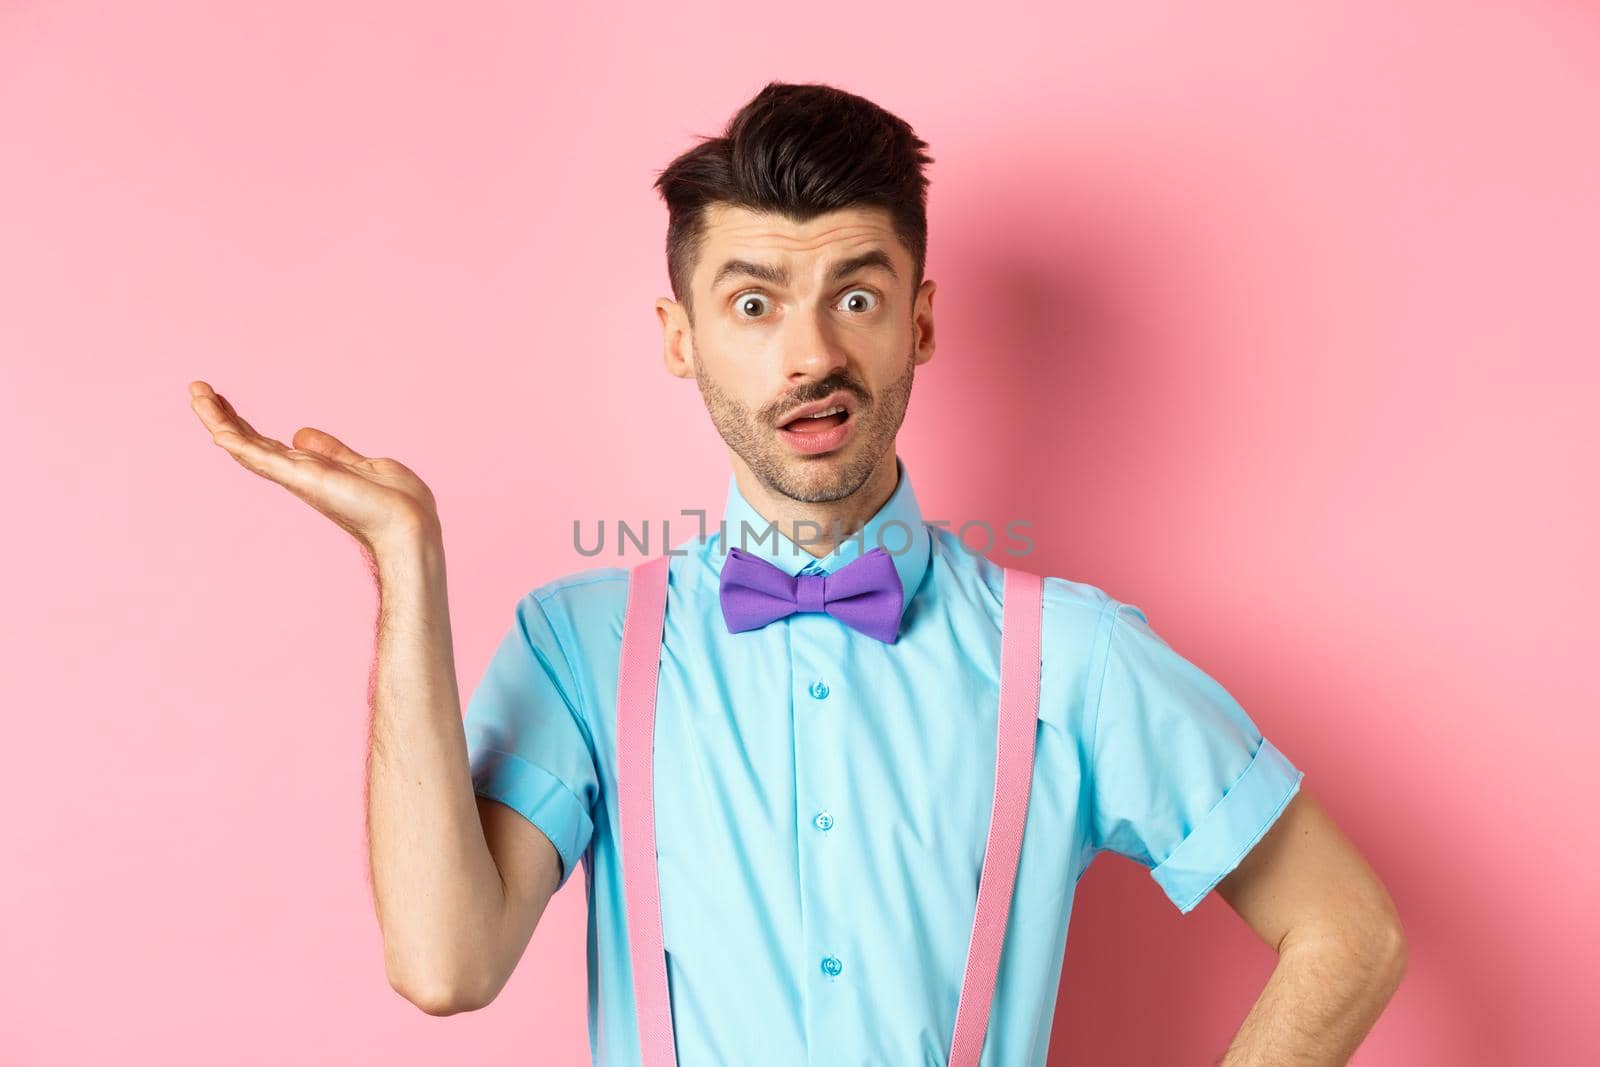 Confused guy cant understand what happening, looking with wtf face, raising hand and staring at camera shocked, standing over pink background.